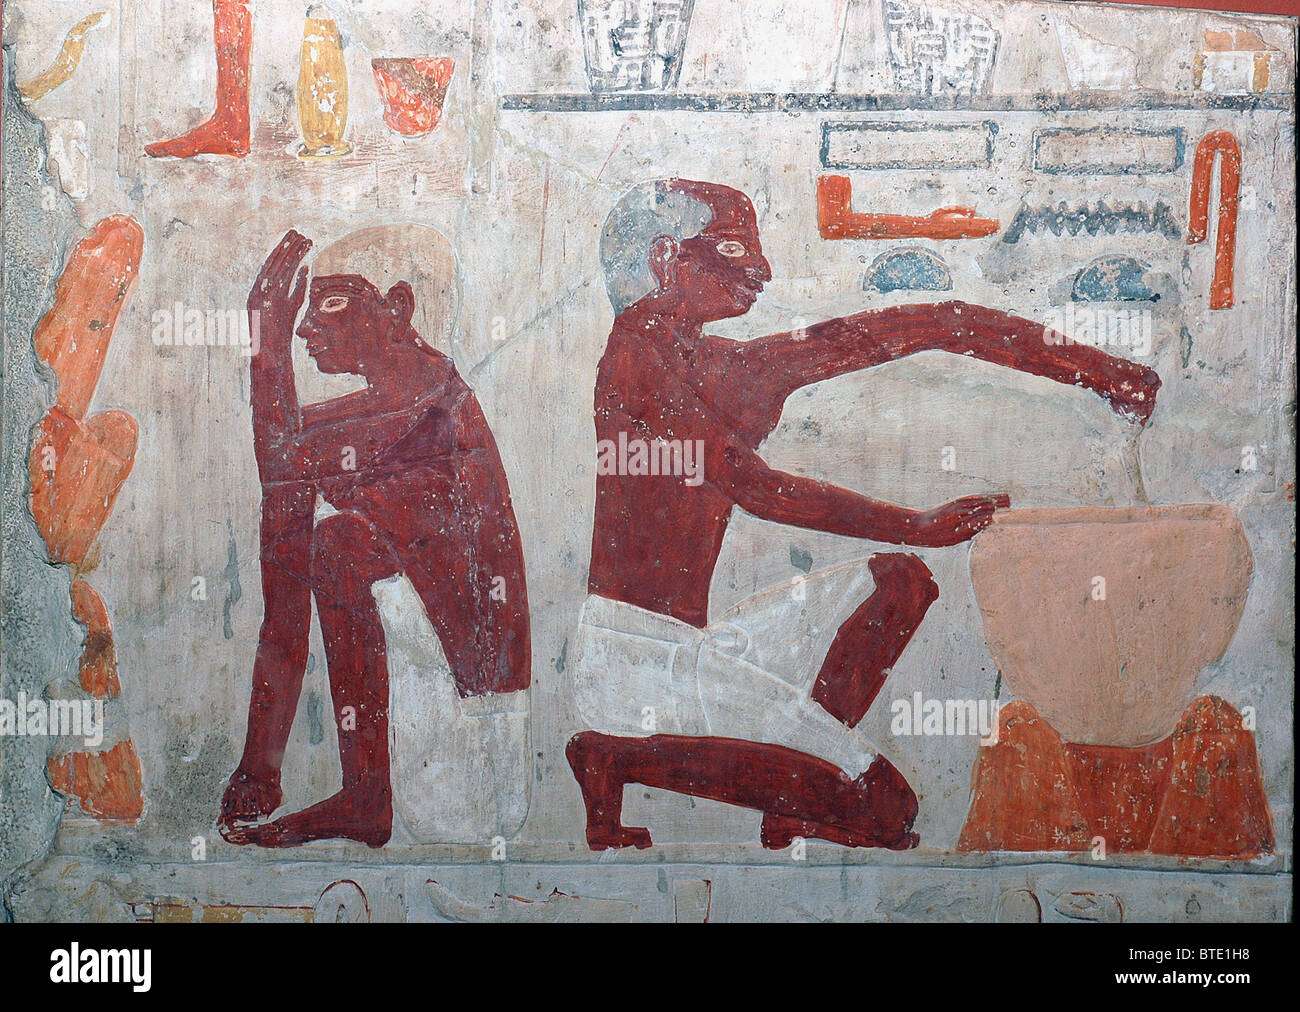 5347. Wall painting of a man cooking. Egypt, 5th. dynasty, c. 2350-2000 BC Stock Photo